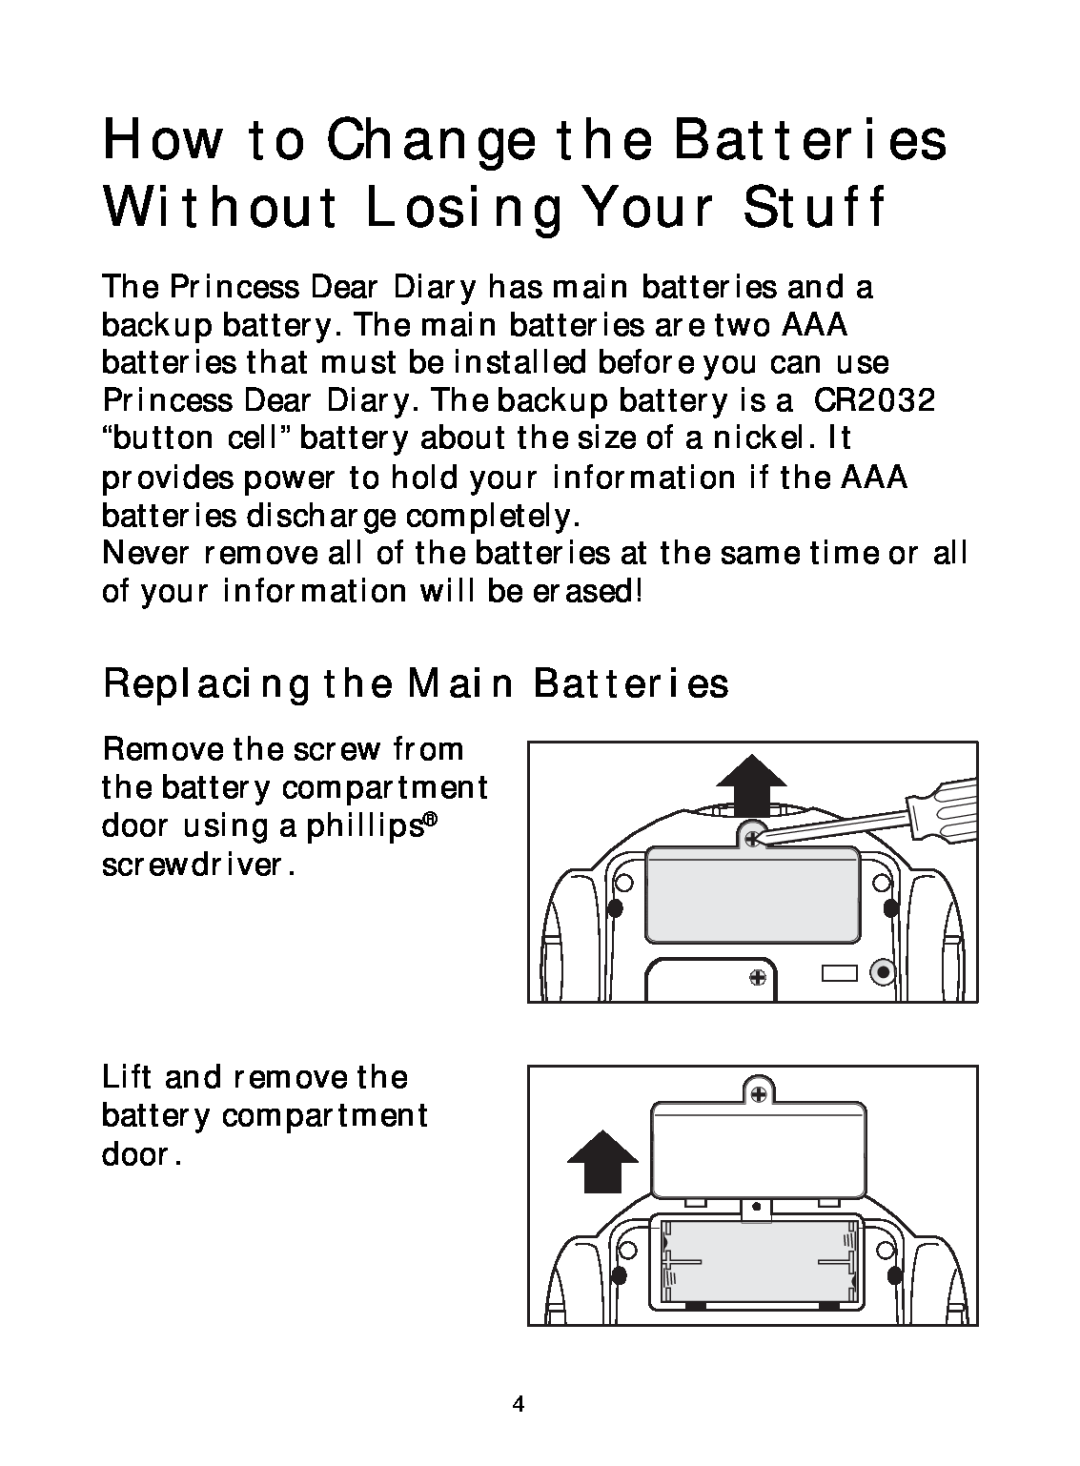 Hasbro 71-554 warranty How to Change the Batteries Without Losing Your Stuff, Replacing the Main Batteries 